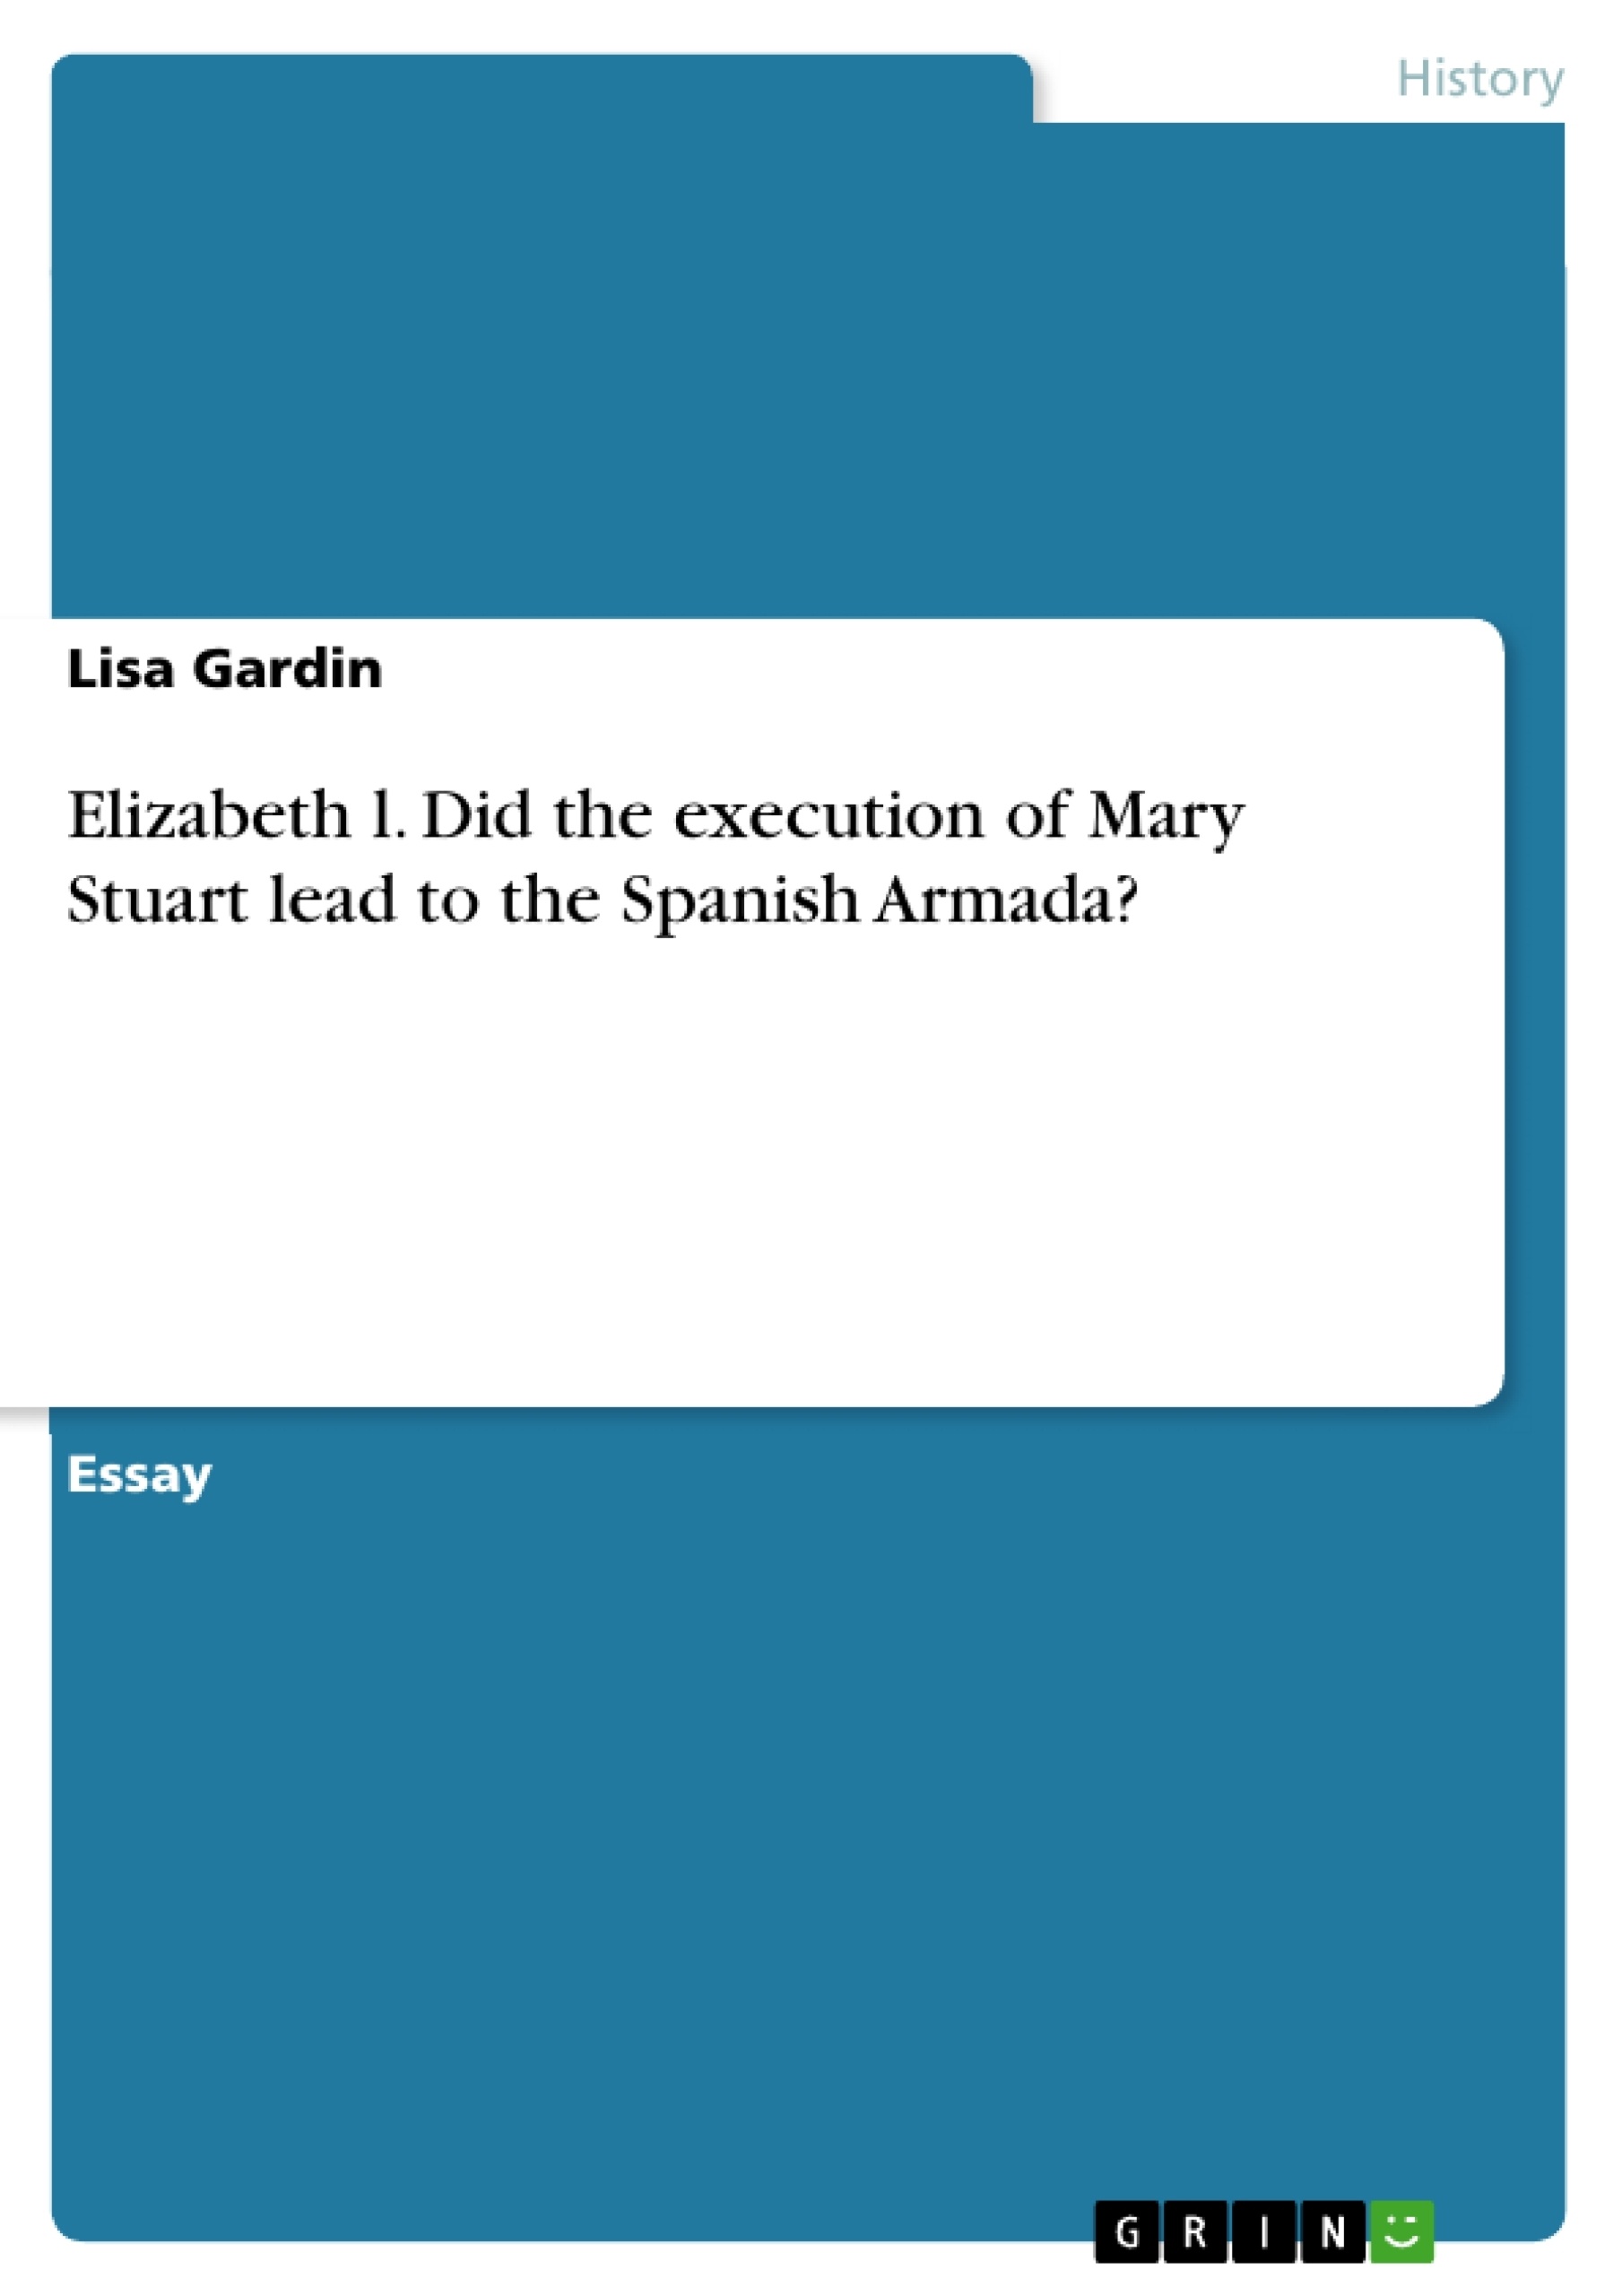 Titre: Elizabeth l. Did the execution of Mary Stuart lead to the Spanish Armada?